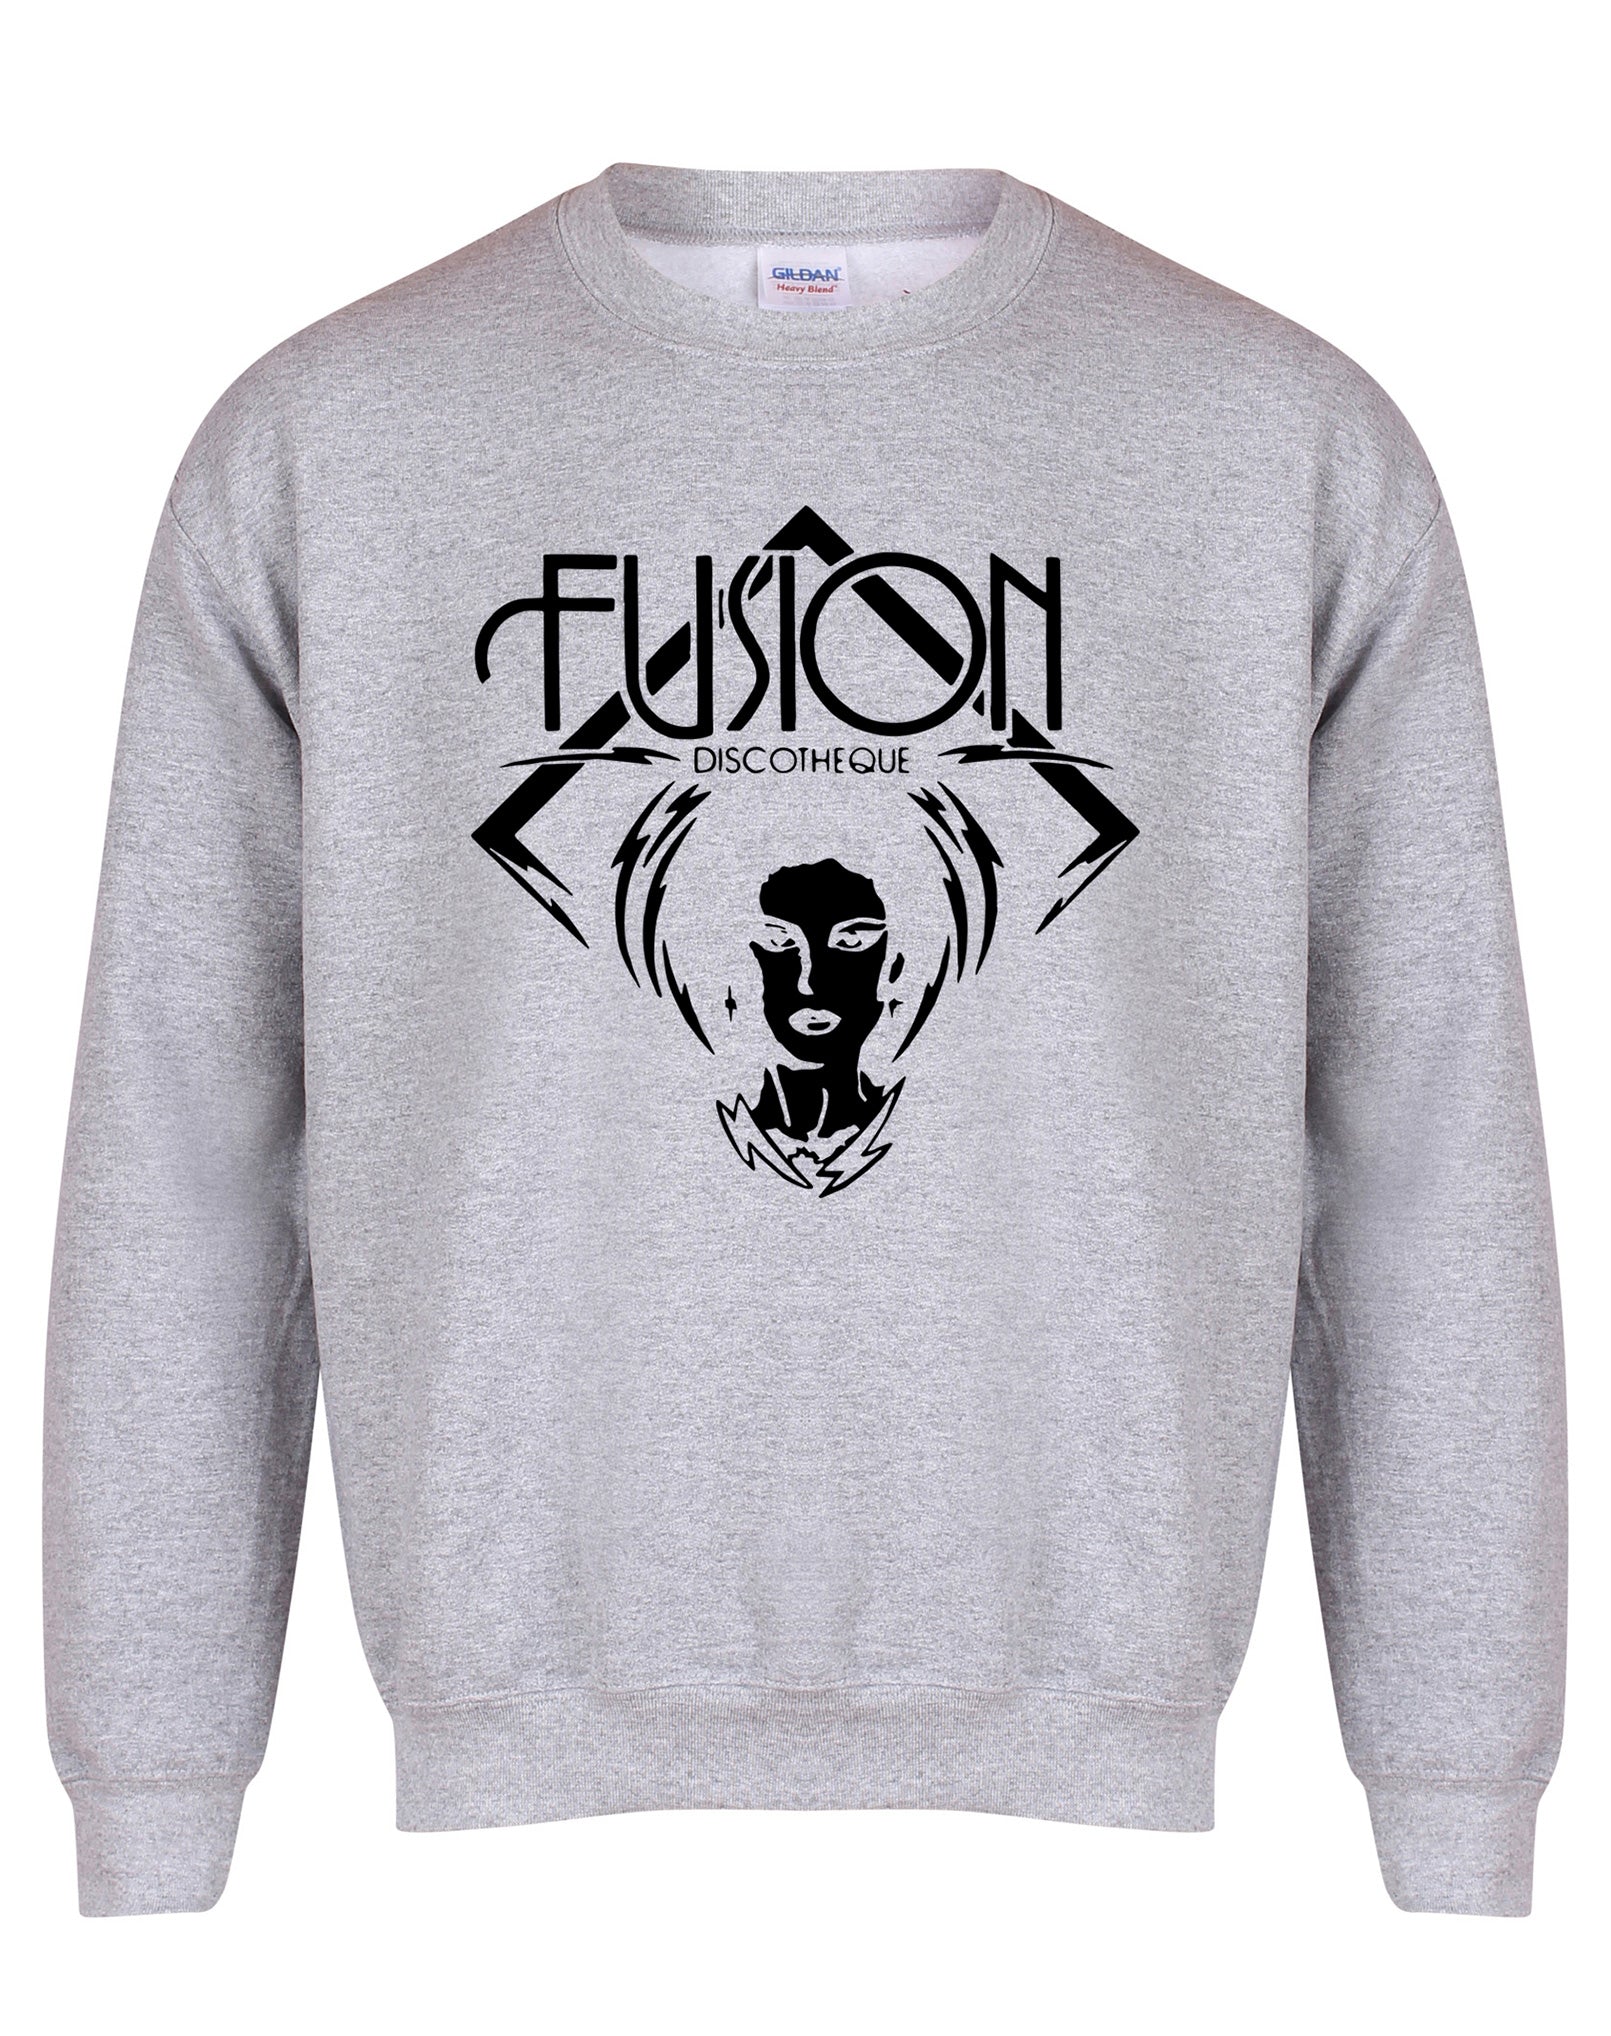 Fusion unisex fit sweatshirt - various colours - Dirty Stop Outs